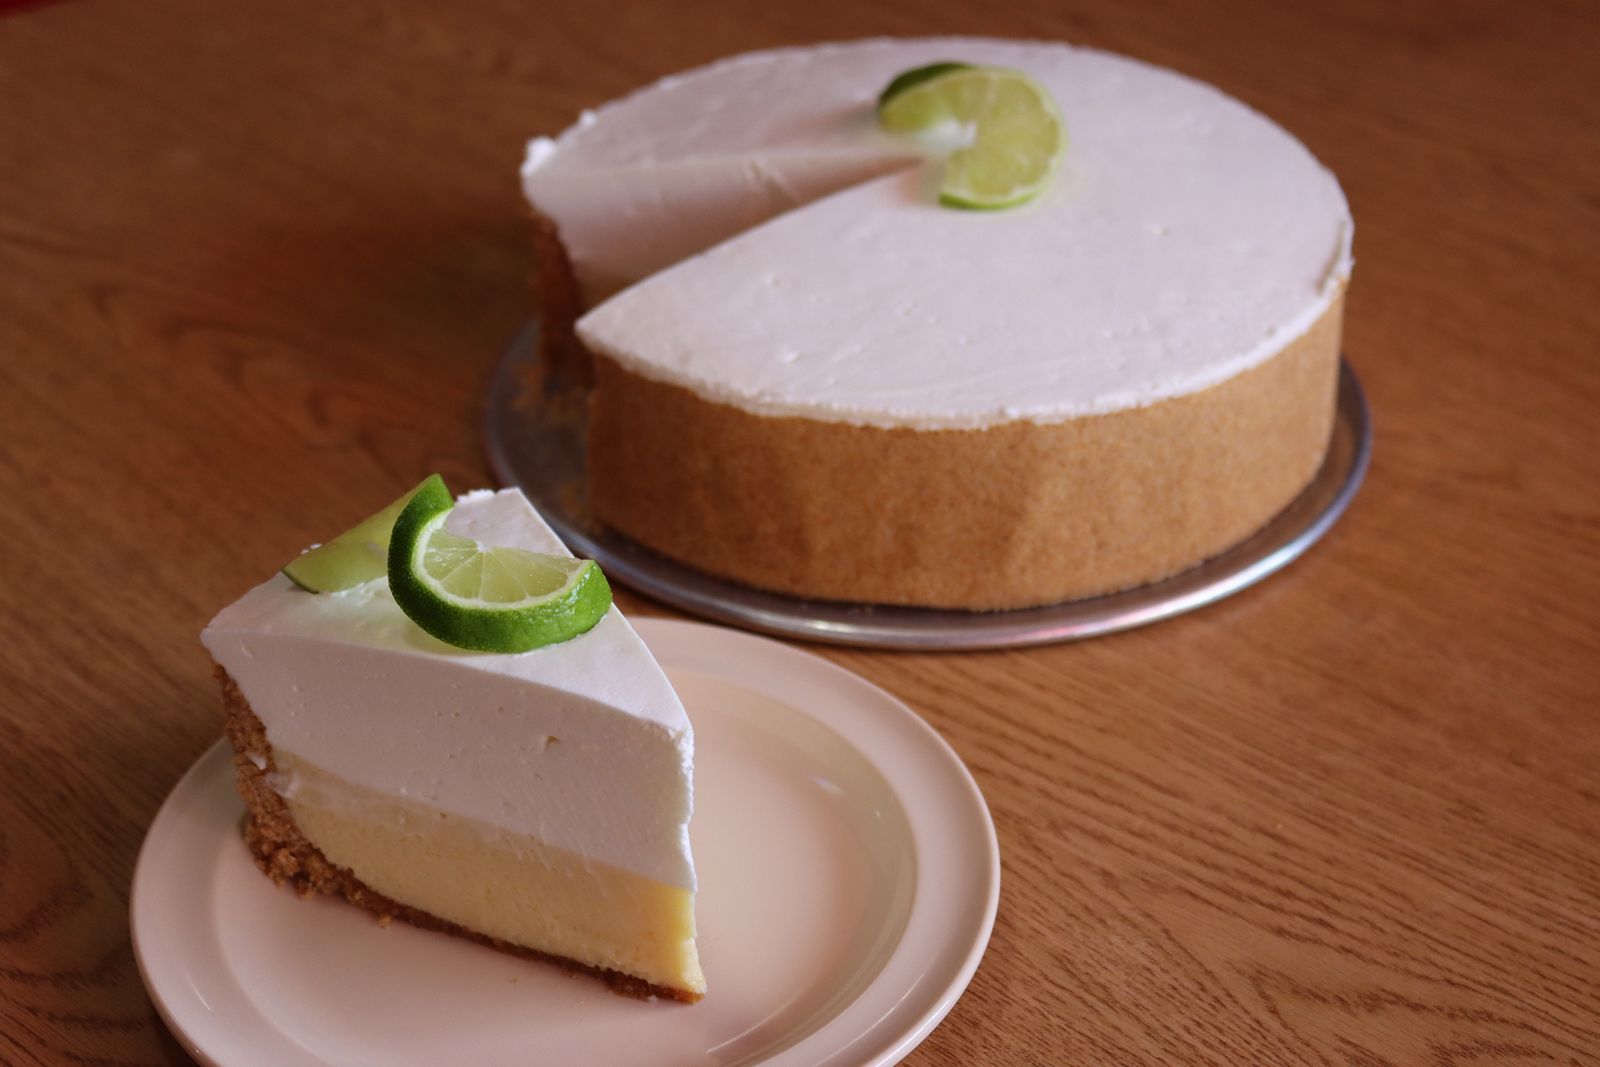 Ring in the Holidays with a Dessert Twist from Aw Shucks and Big Shucks Oyster Bar - Key Lime Pie!